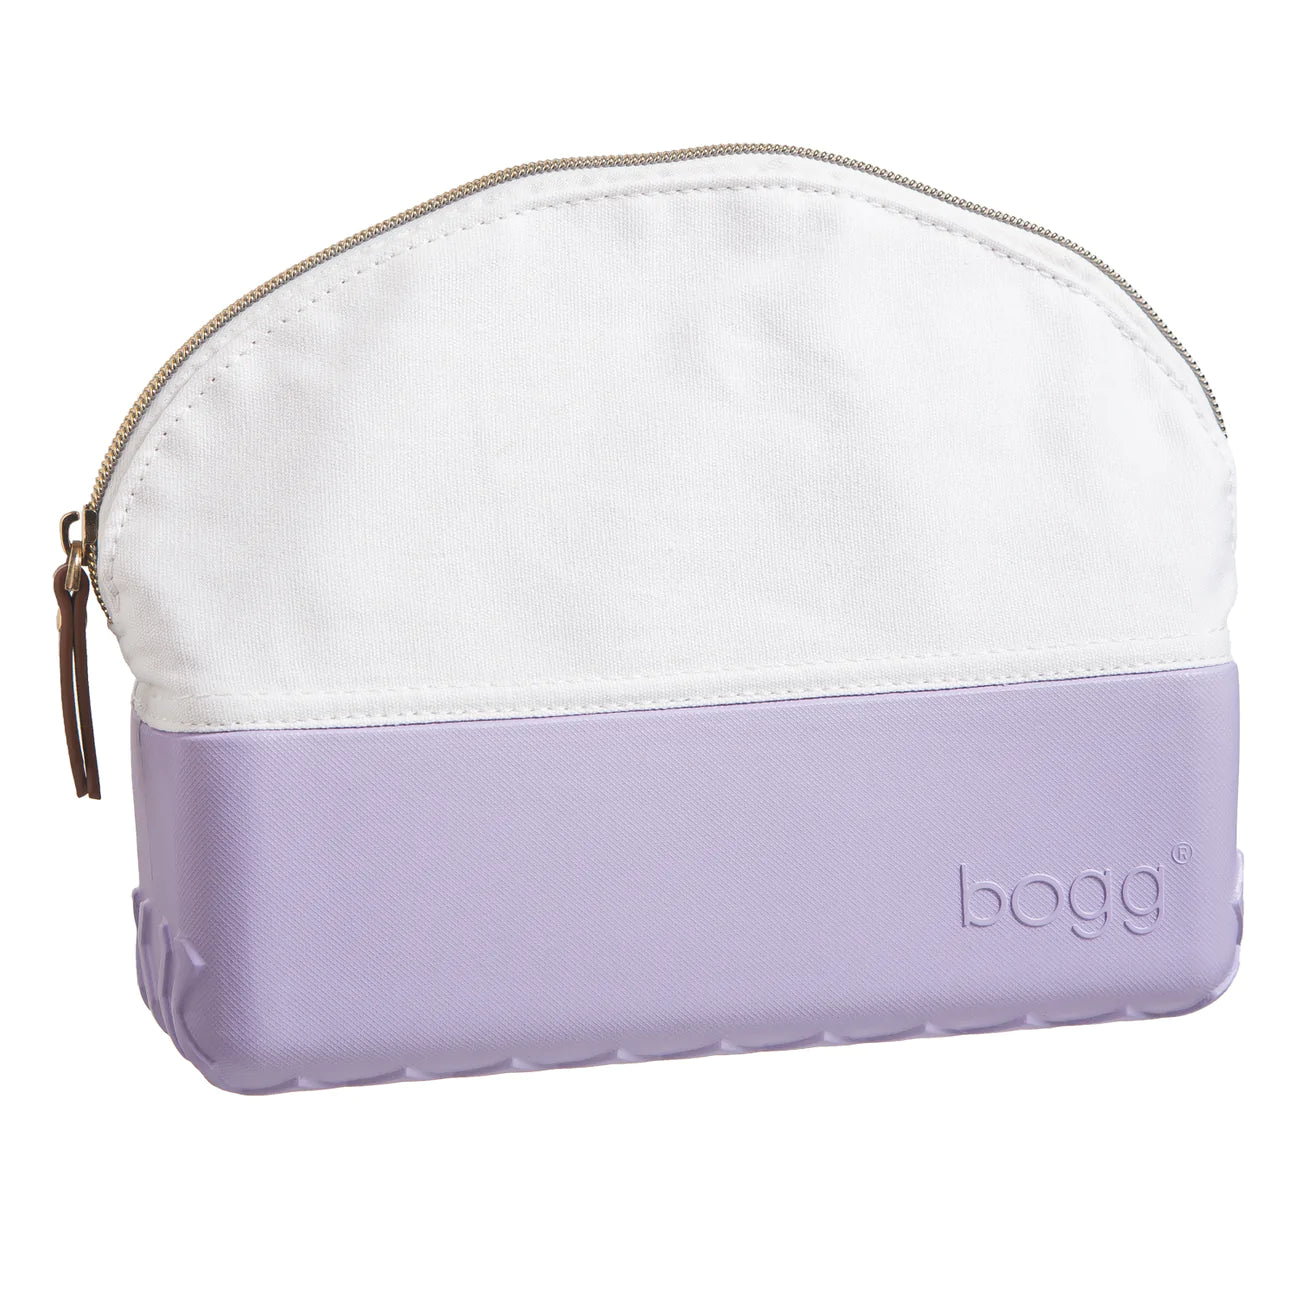 ☘☘☘ Genuine Beauty and the Bogg Cosmetic Bag Lilac NWT Immediate Ship ☘☘☘